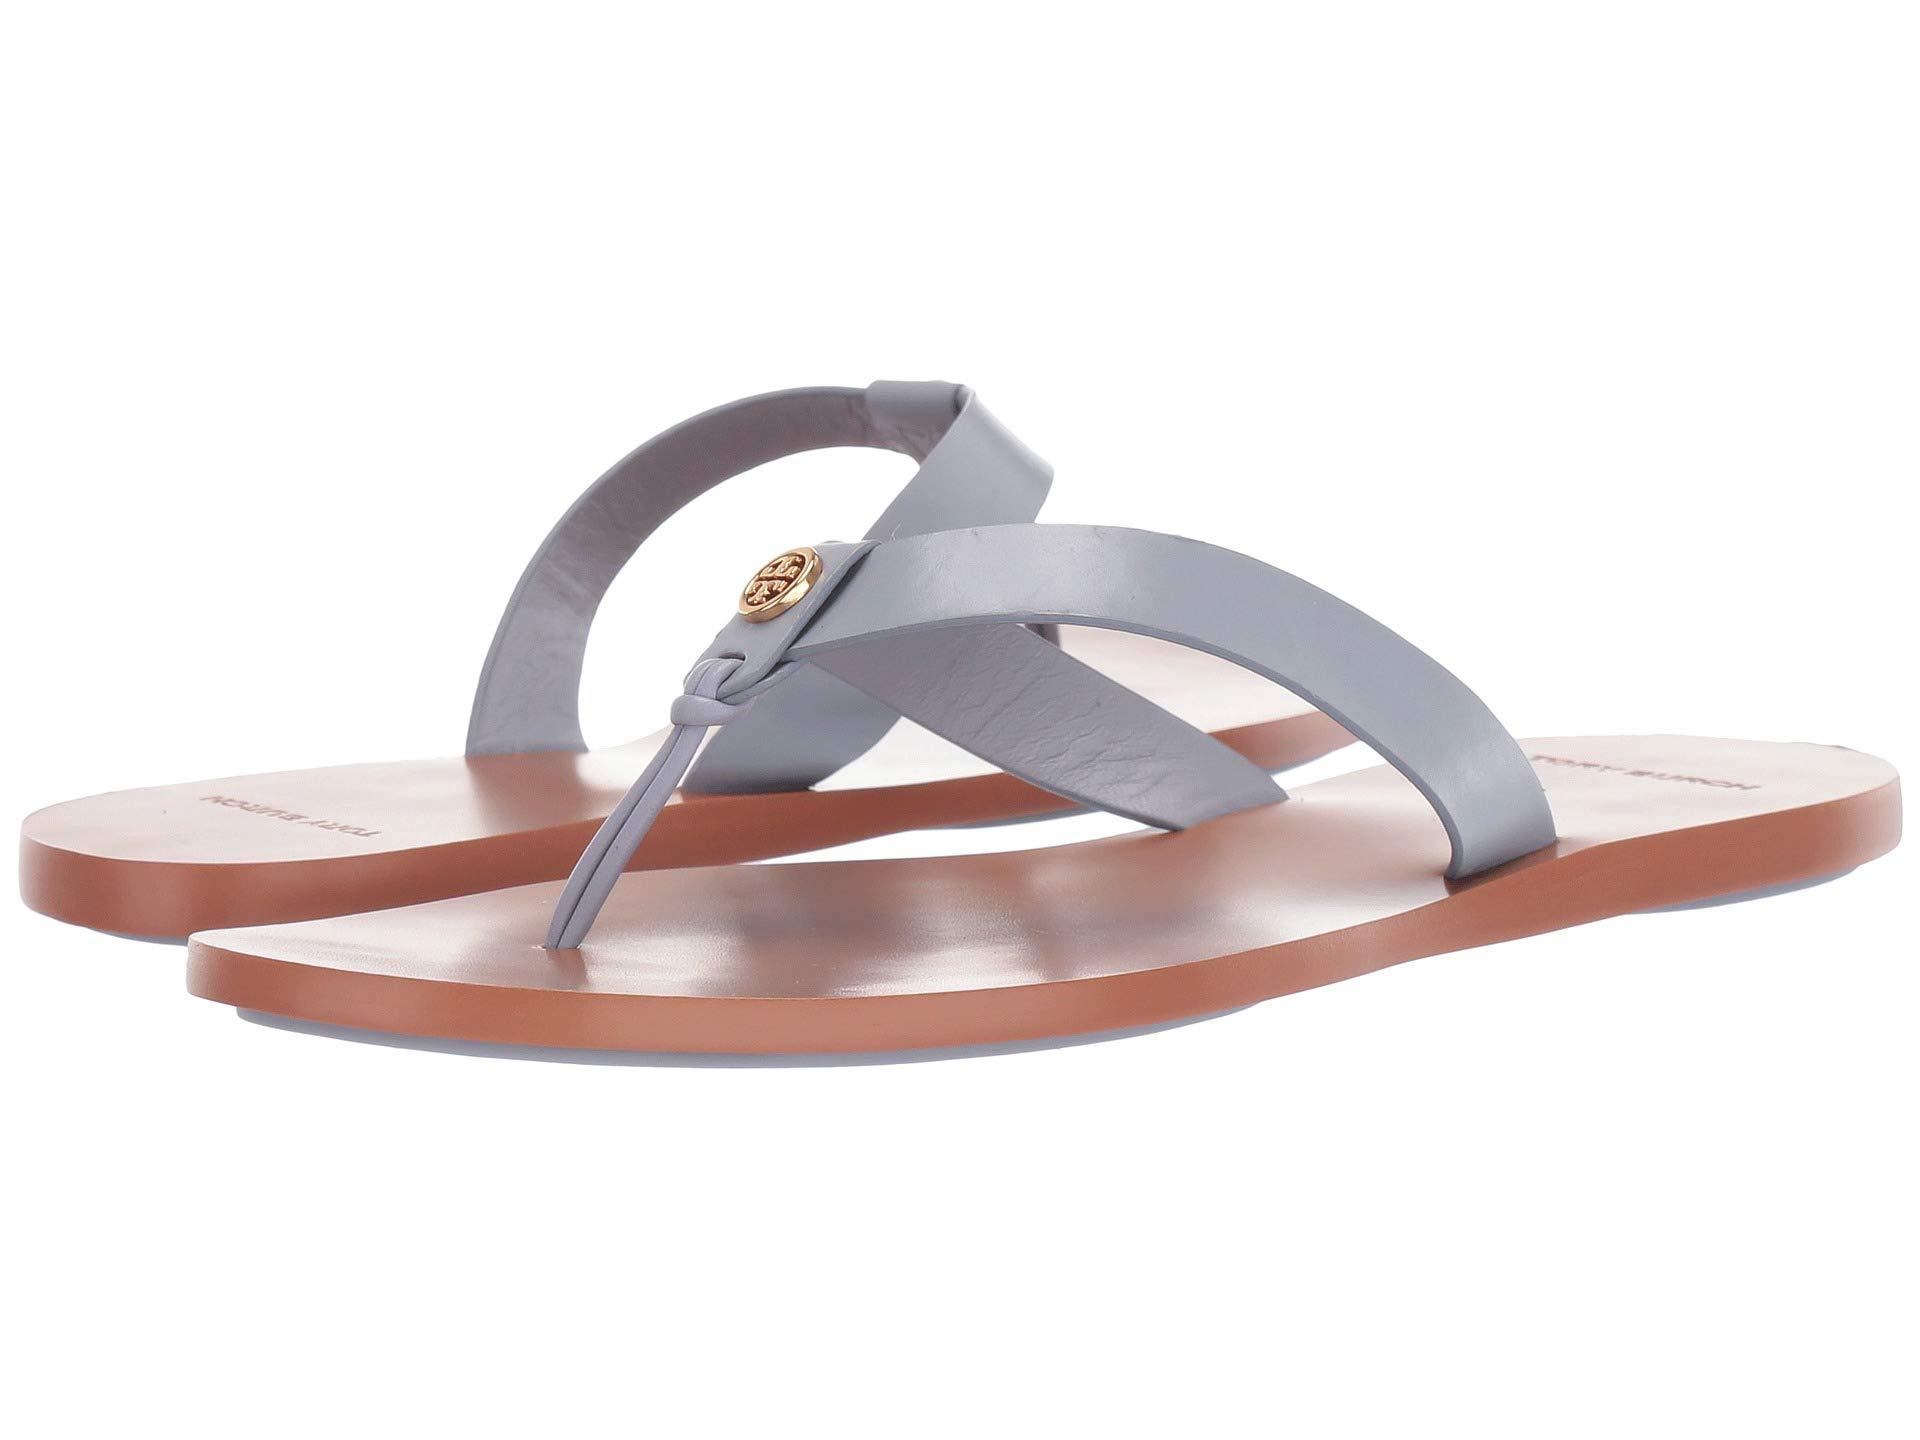 tory burch women's manon leather thong sandals